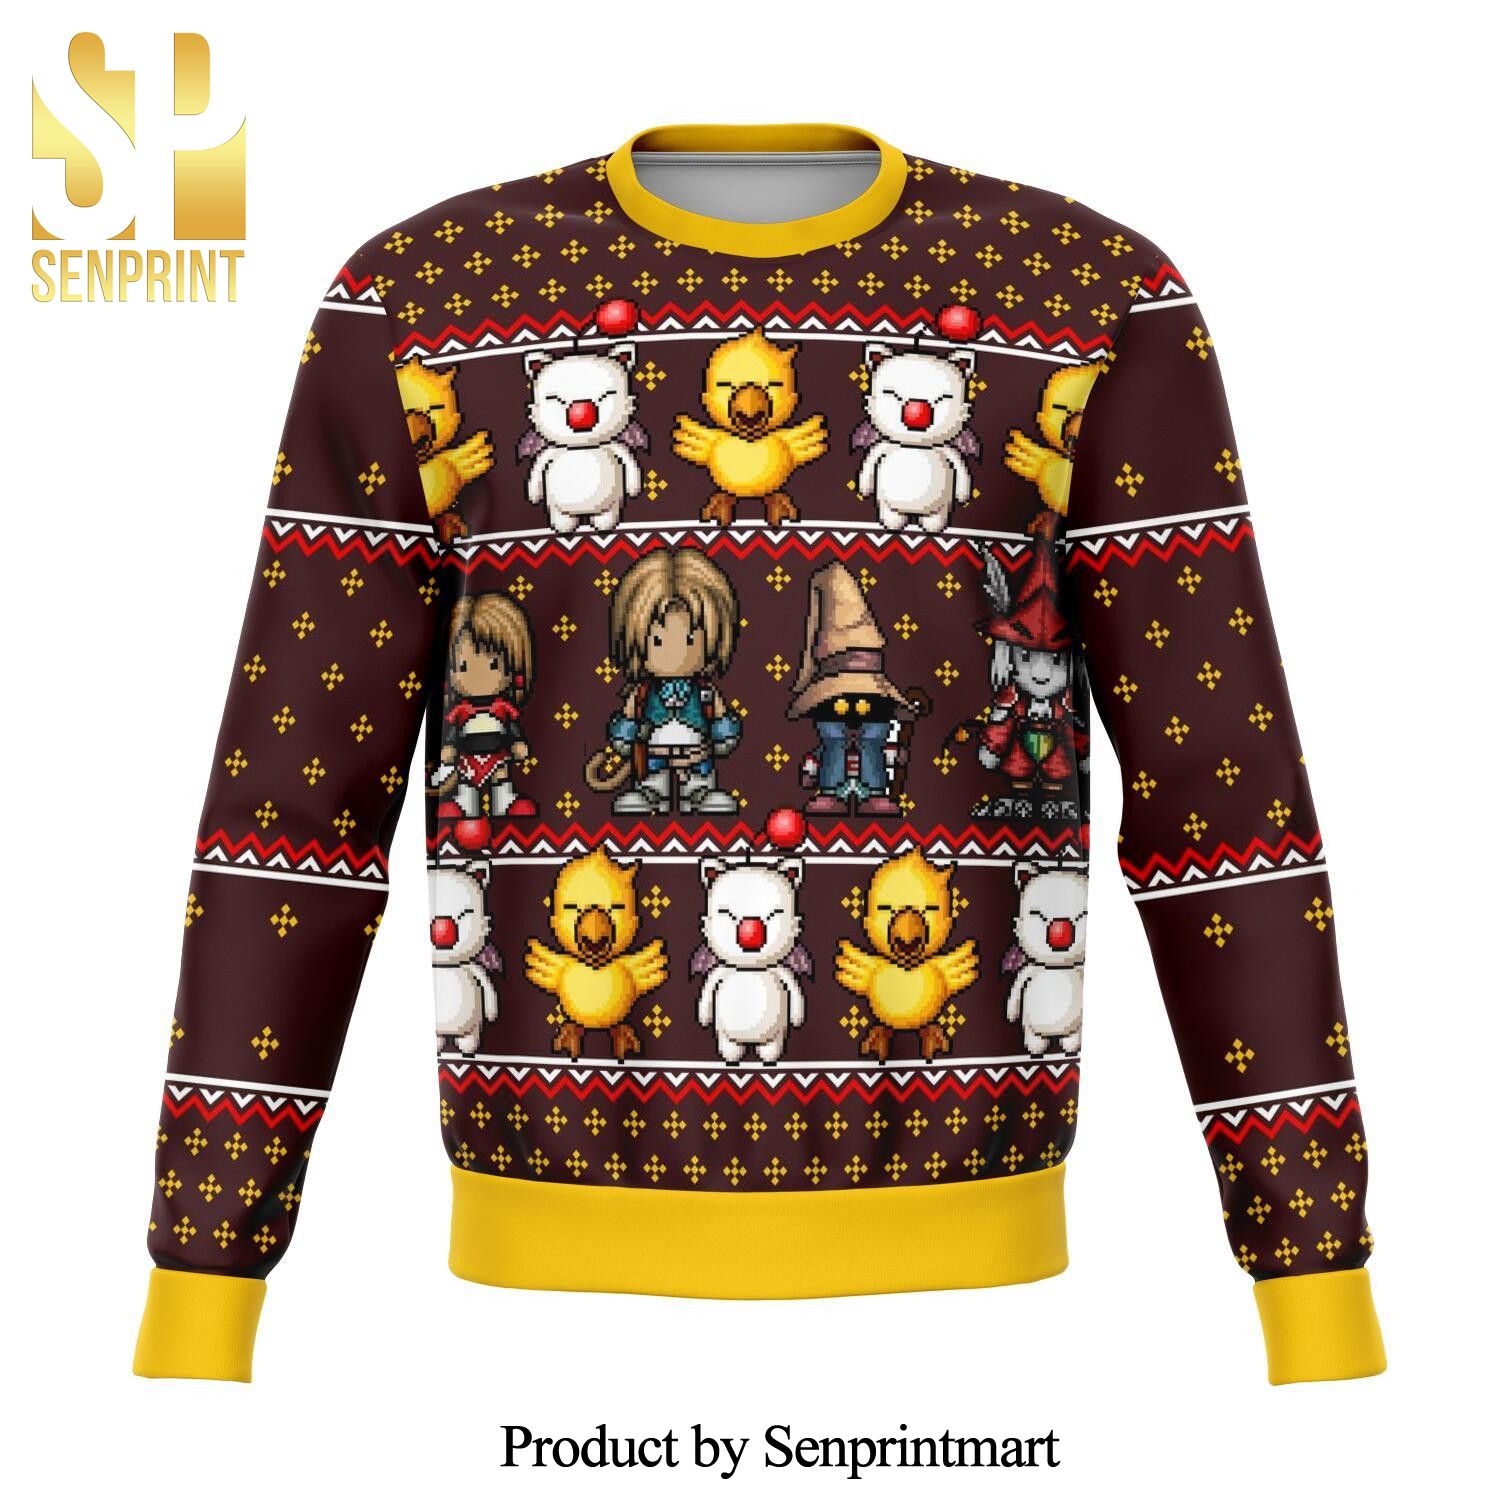 Classic 8Bit Final Fantasy Knitted Ugly Christmas Sweater